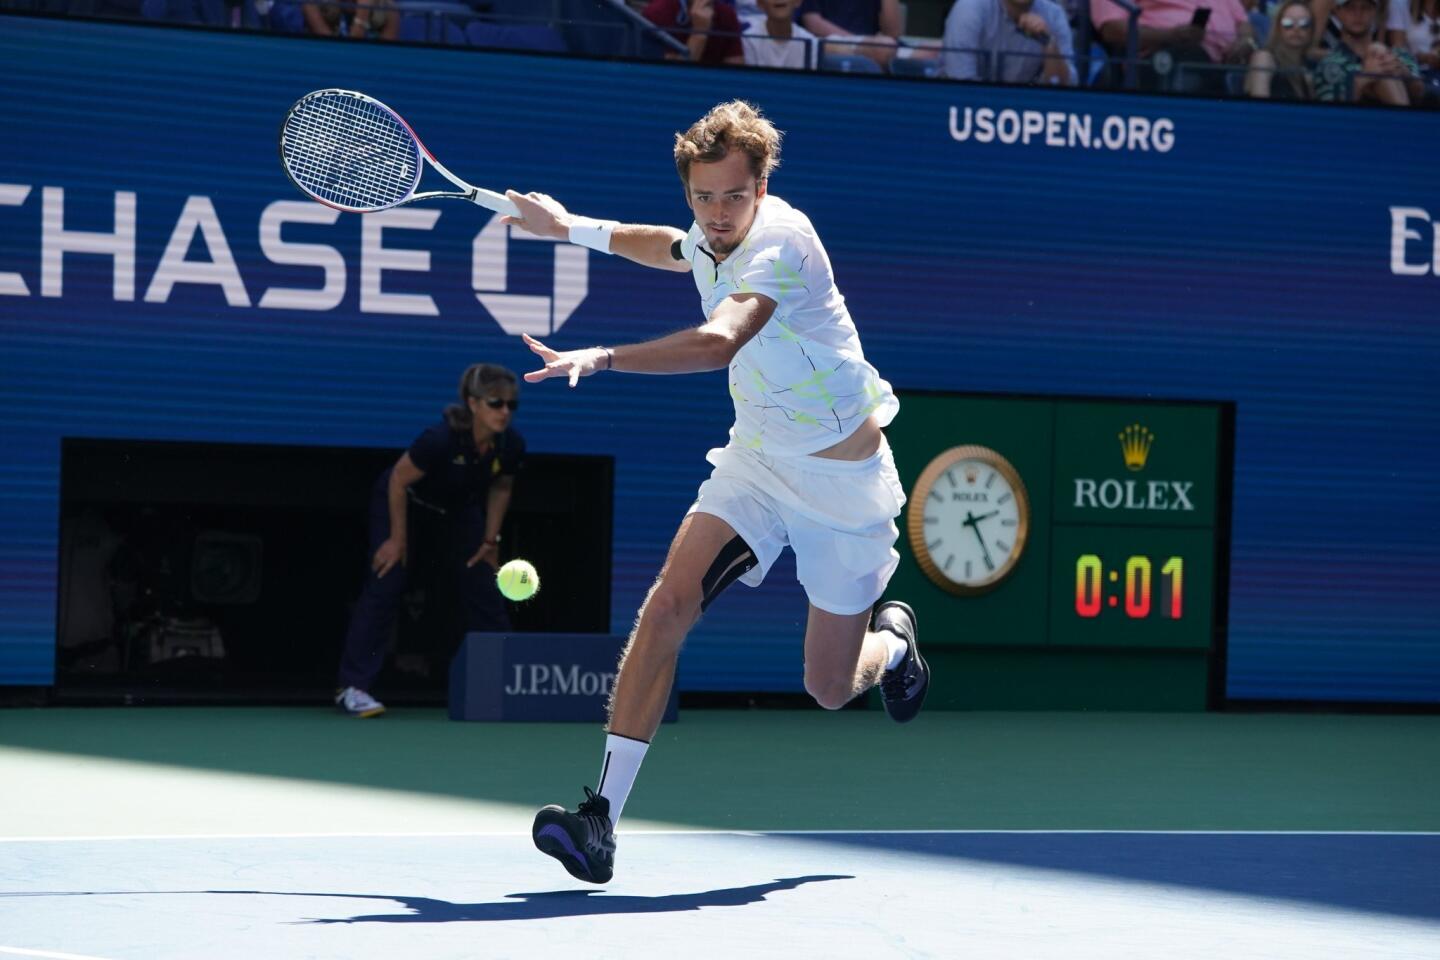 Daniil Medvedev of Russia plays against Stan Wawrinka of Switzerland during their Men's Singles Quarterfinal match at the 2019 U.S. Open at the USTA Billie Jean King National Tennis Center in New York on Sept. 3, 2019.